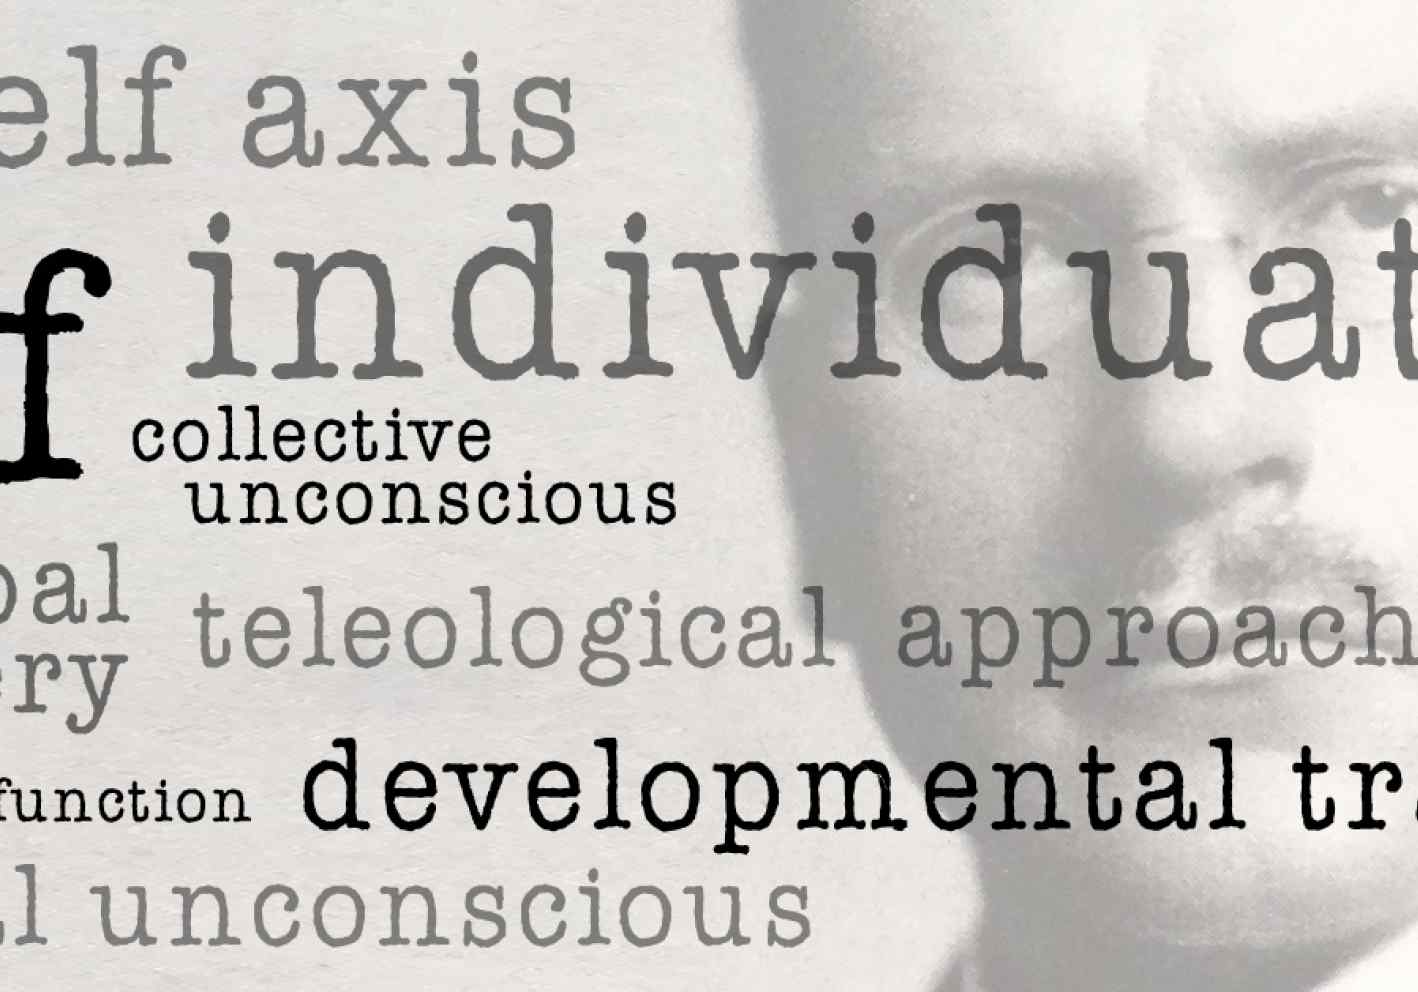 Some Jungian terms explained